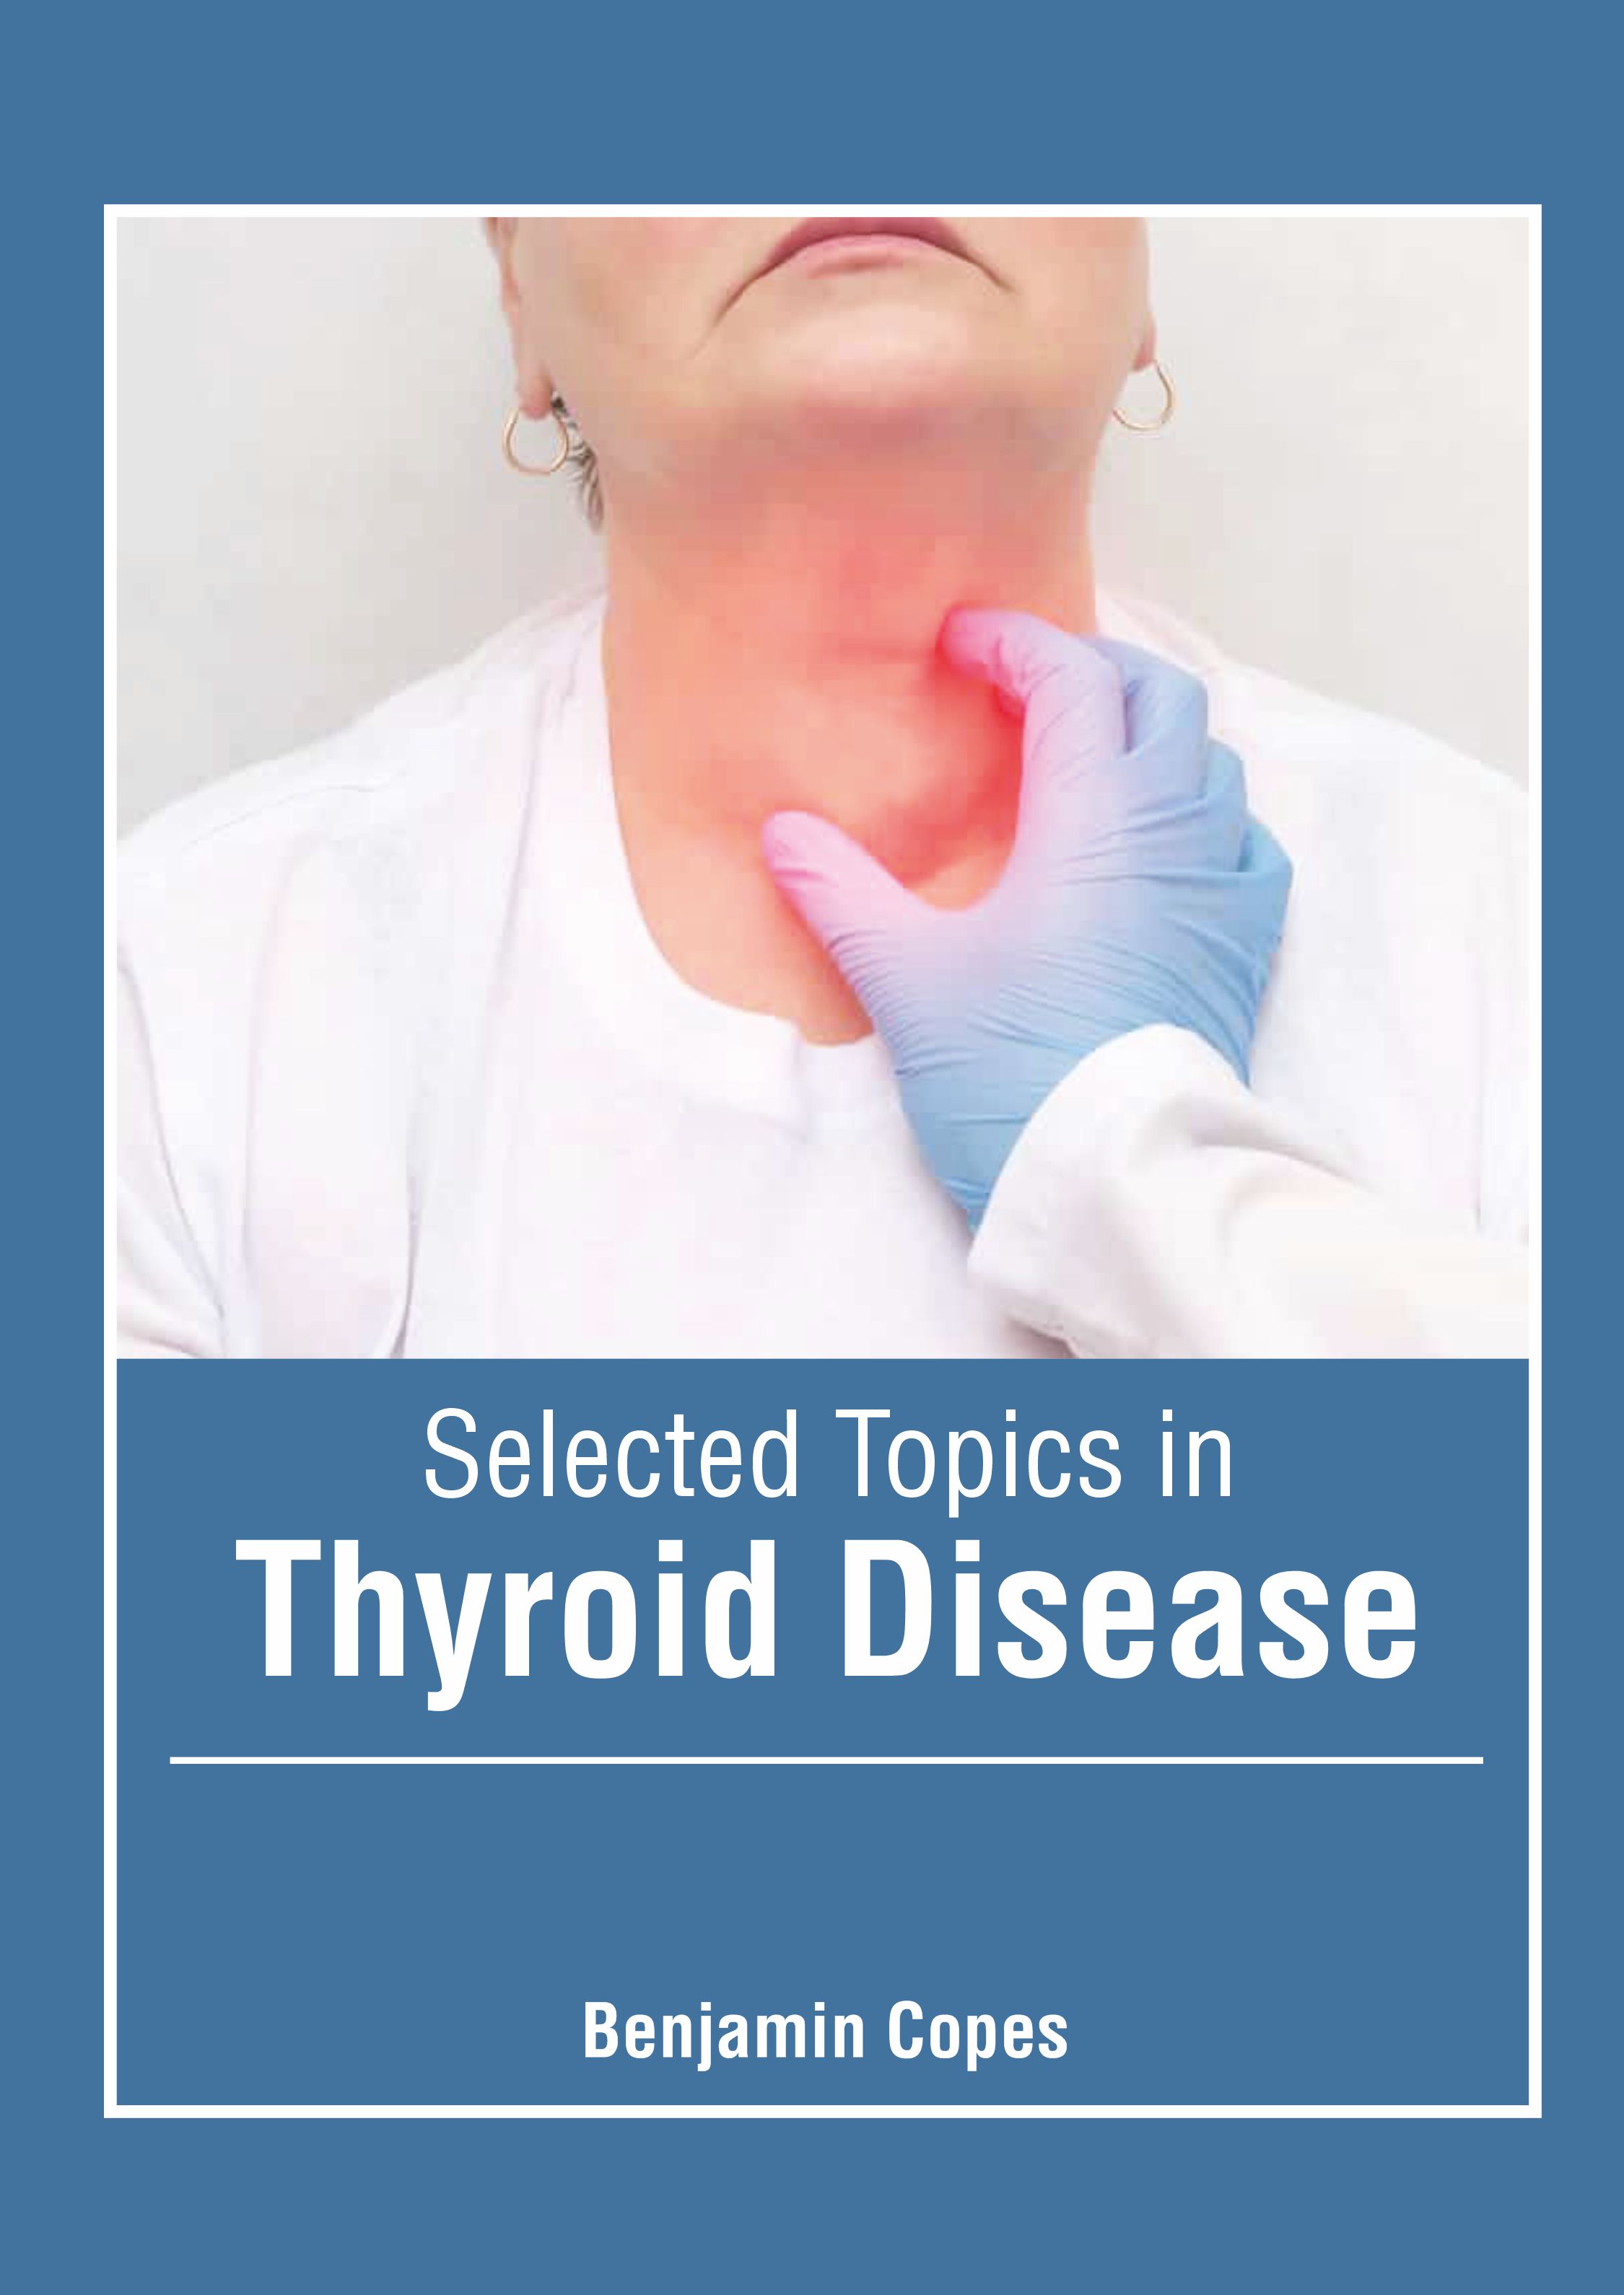 

exclusive-publishers/american-medical-publishers/selected-topics-in-thyroid-disease-9781639271252